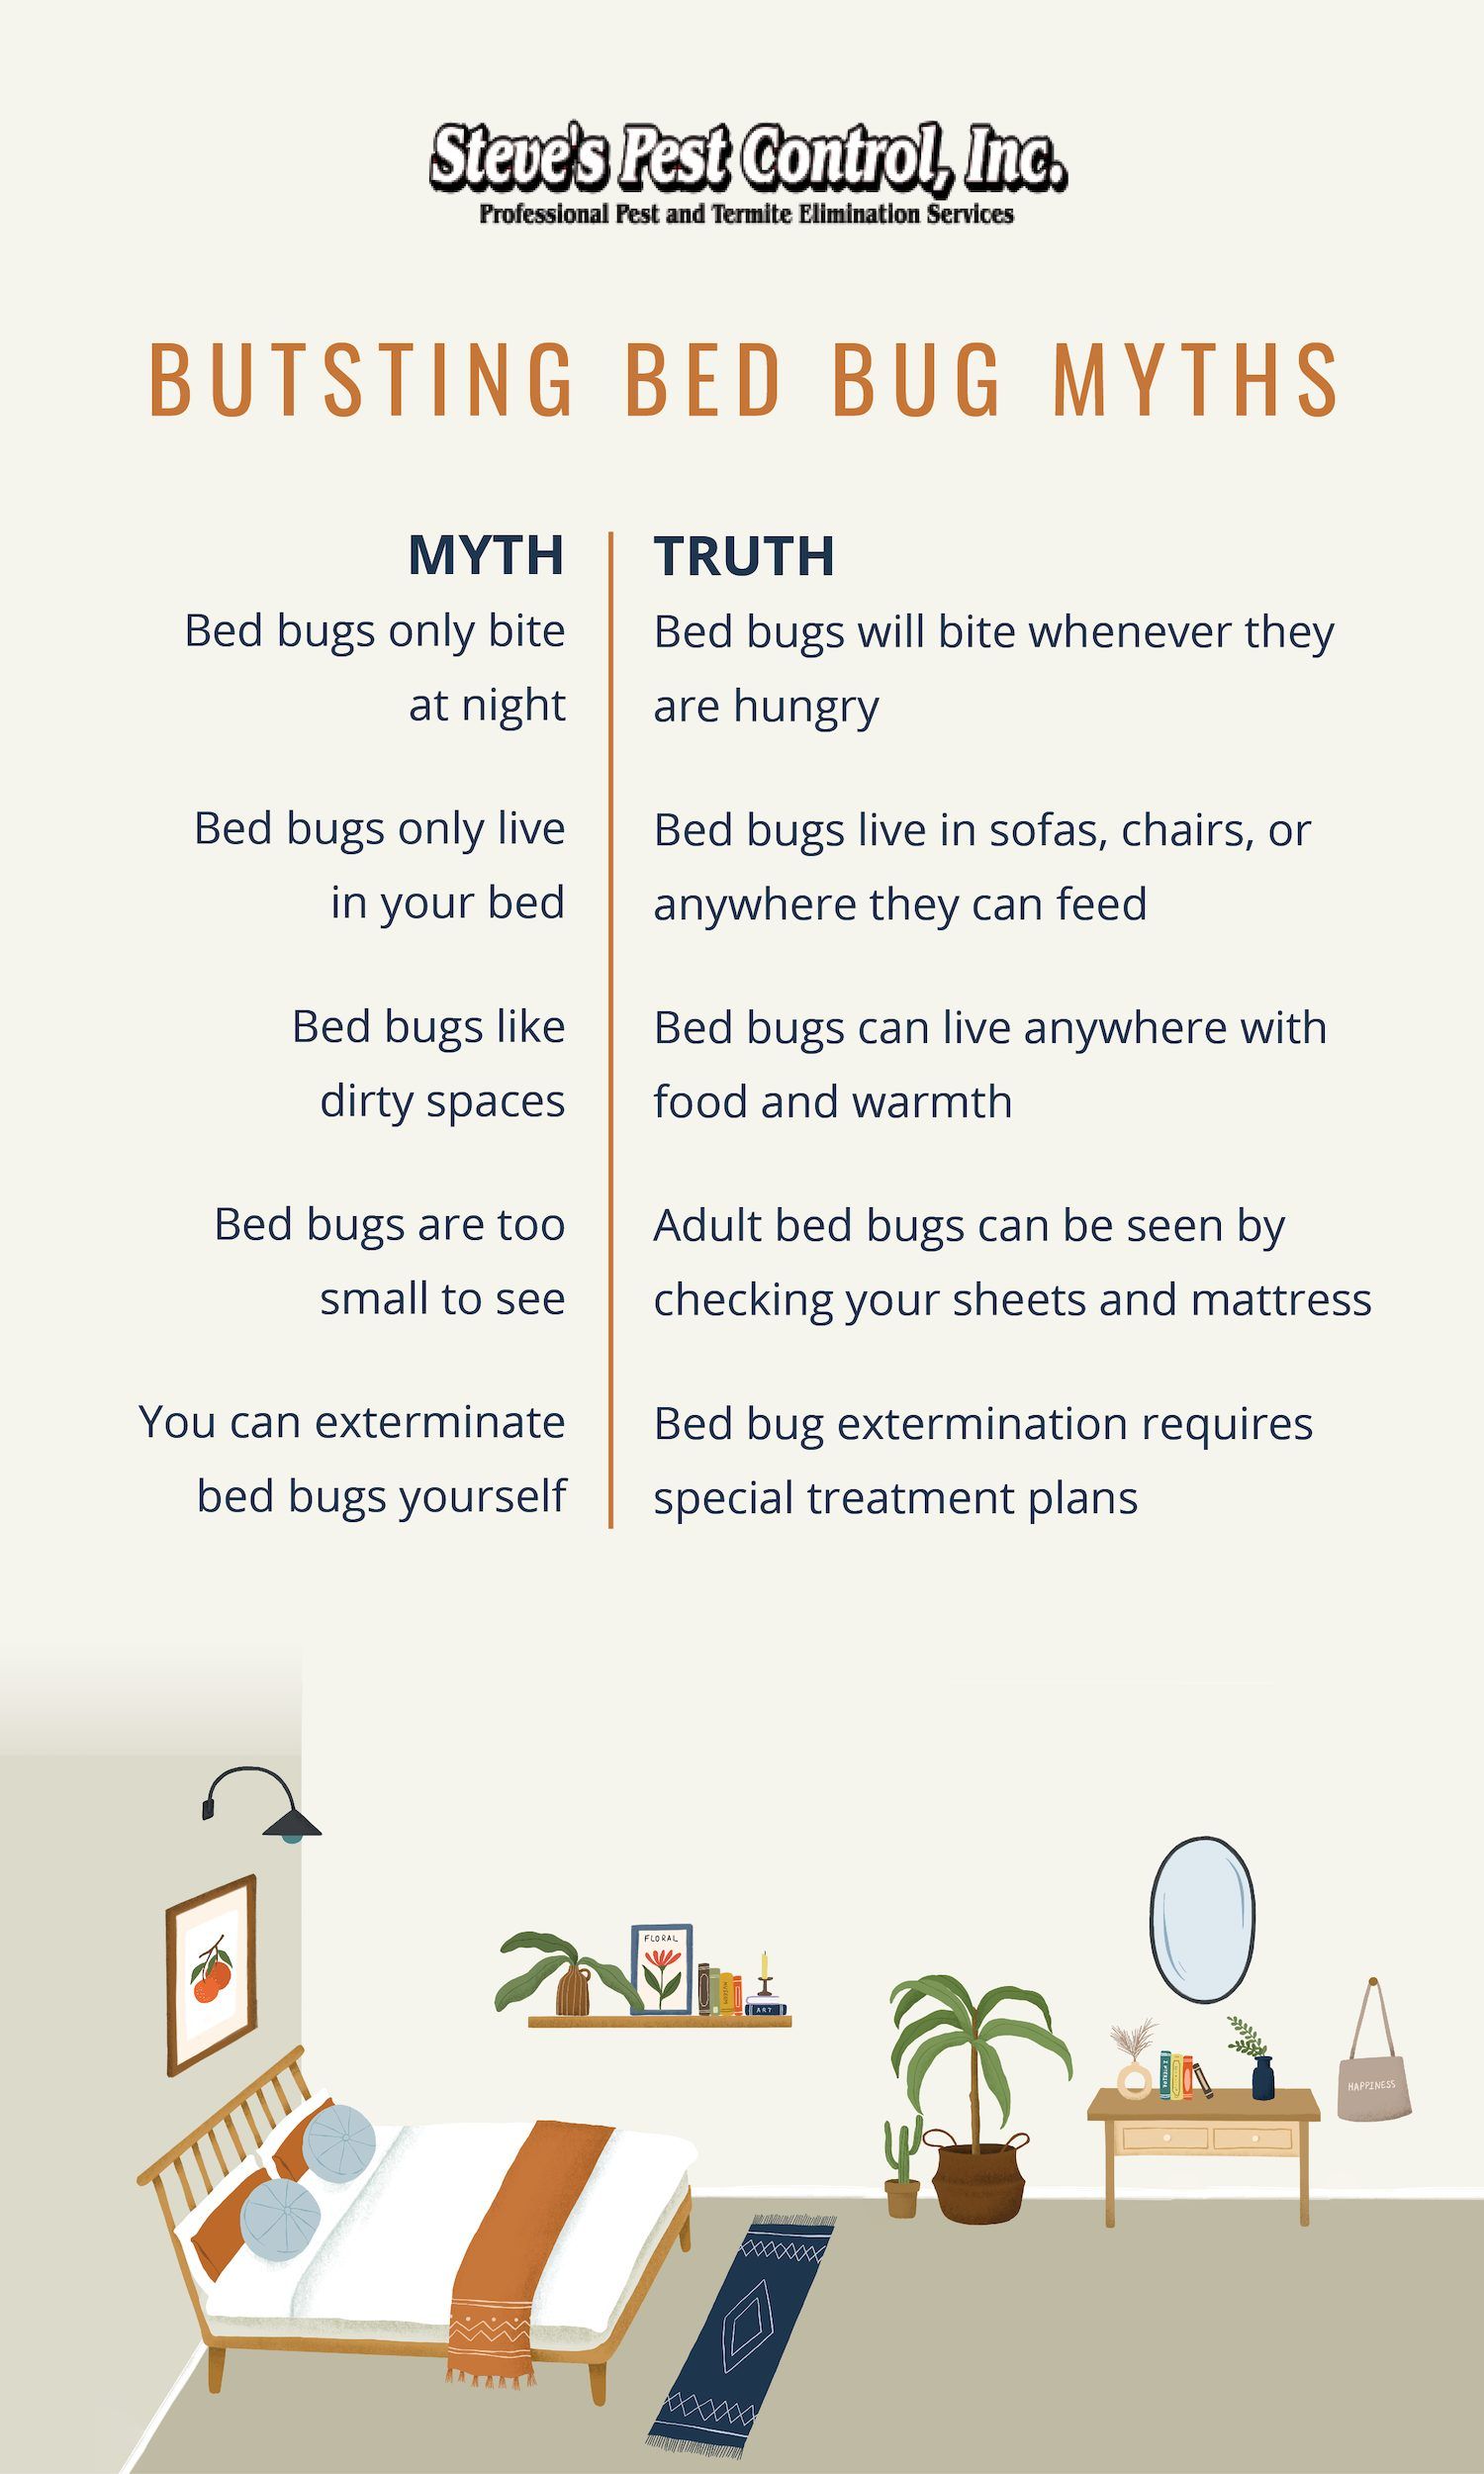 Learn how to ID ang get rid of bed bugs from Steve's Pest Control.